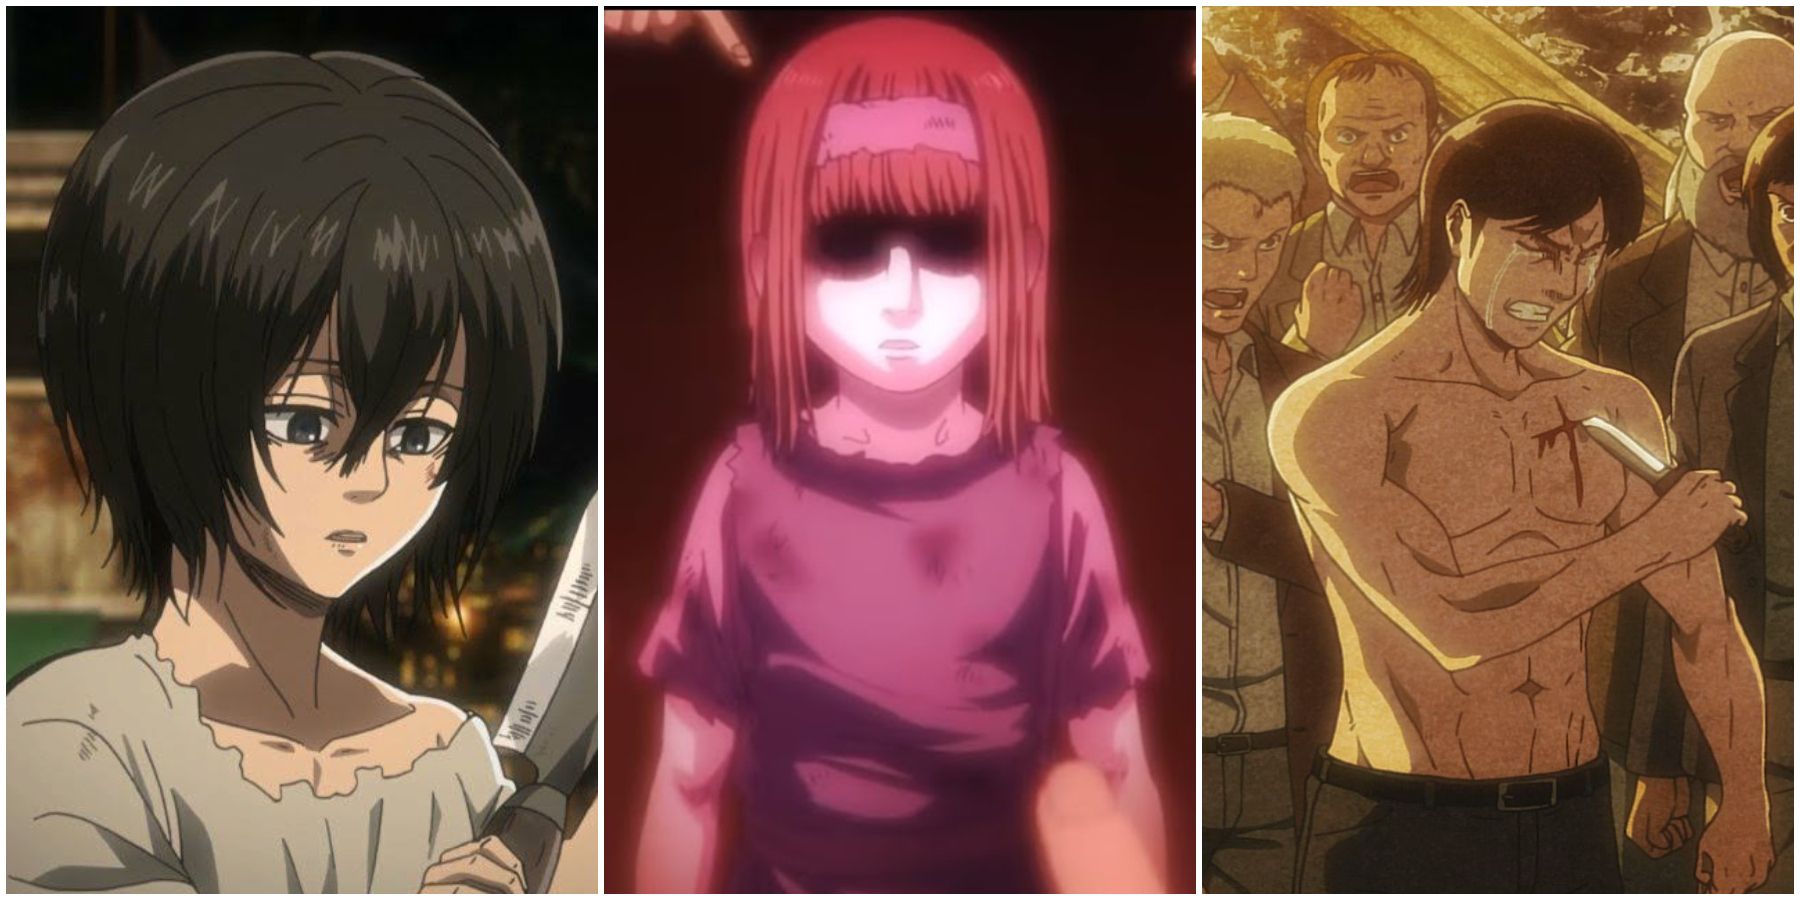 10 Anime Girls With Heartbreaking Backstories That Will Make You Cry